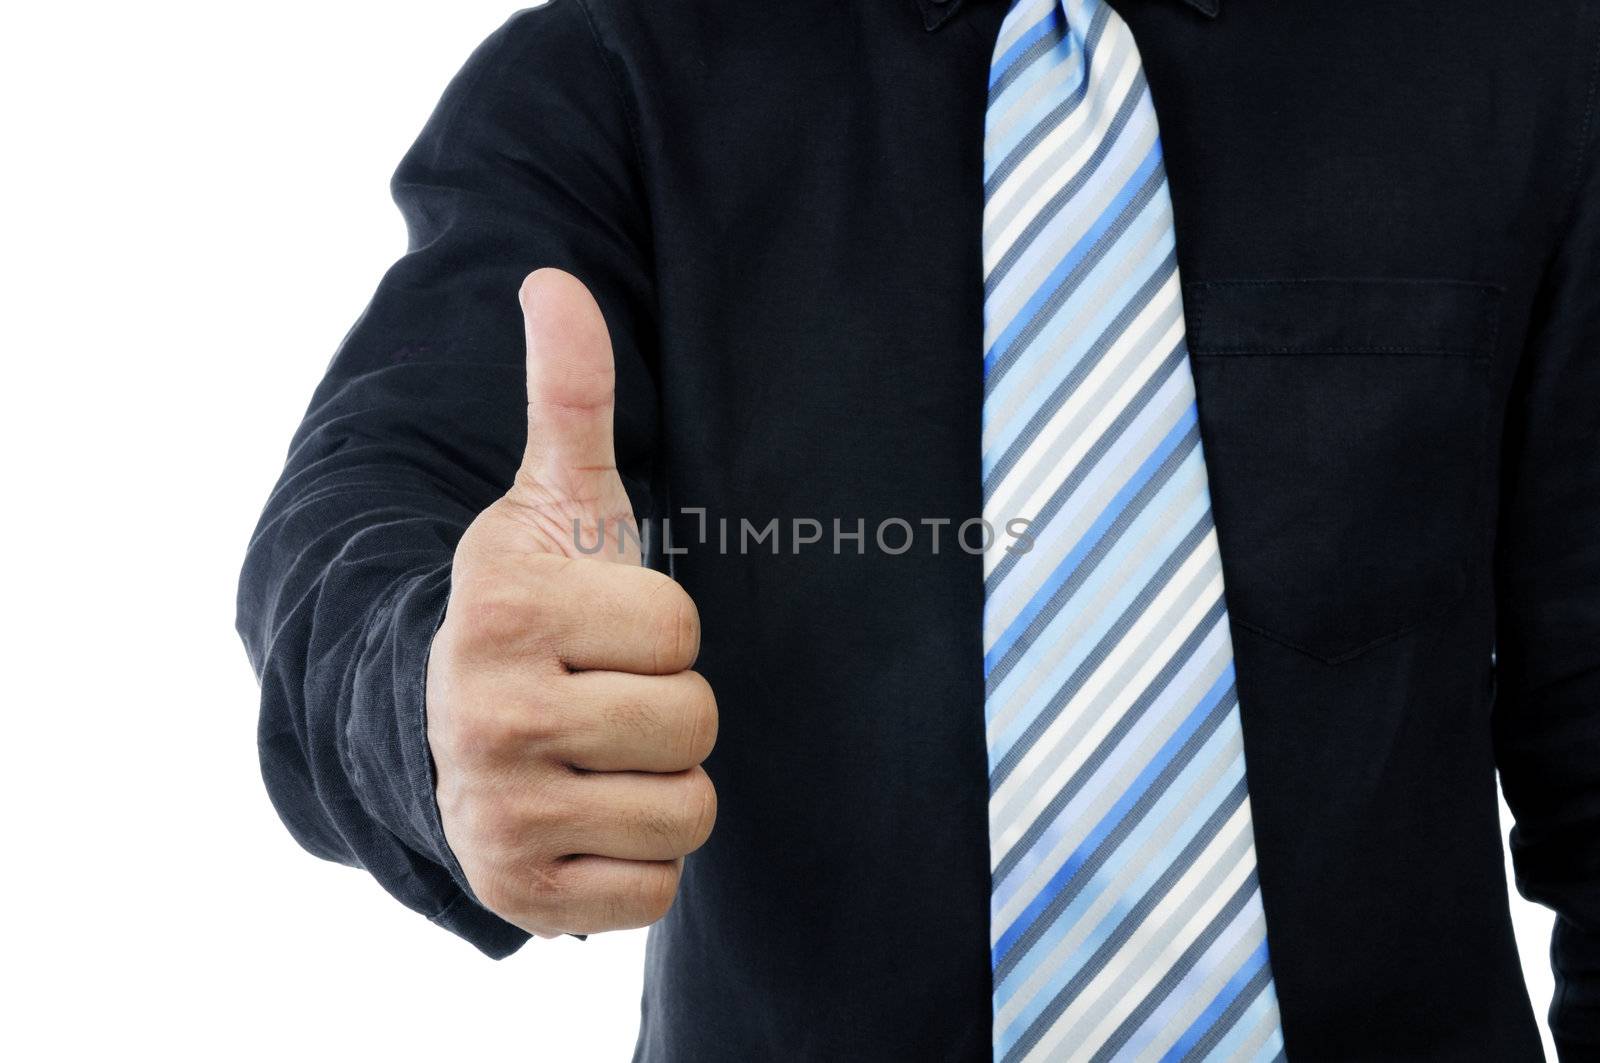 Closeup of a businessman giving thumb up sign against white background.